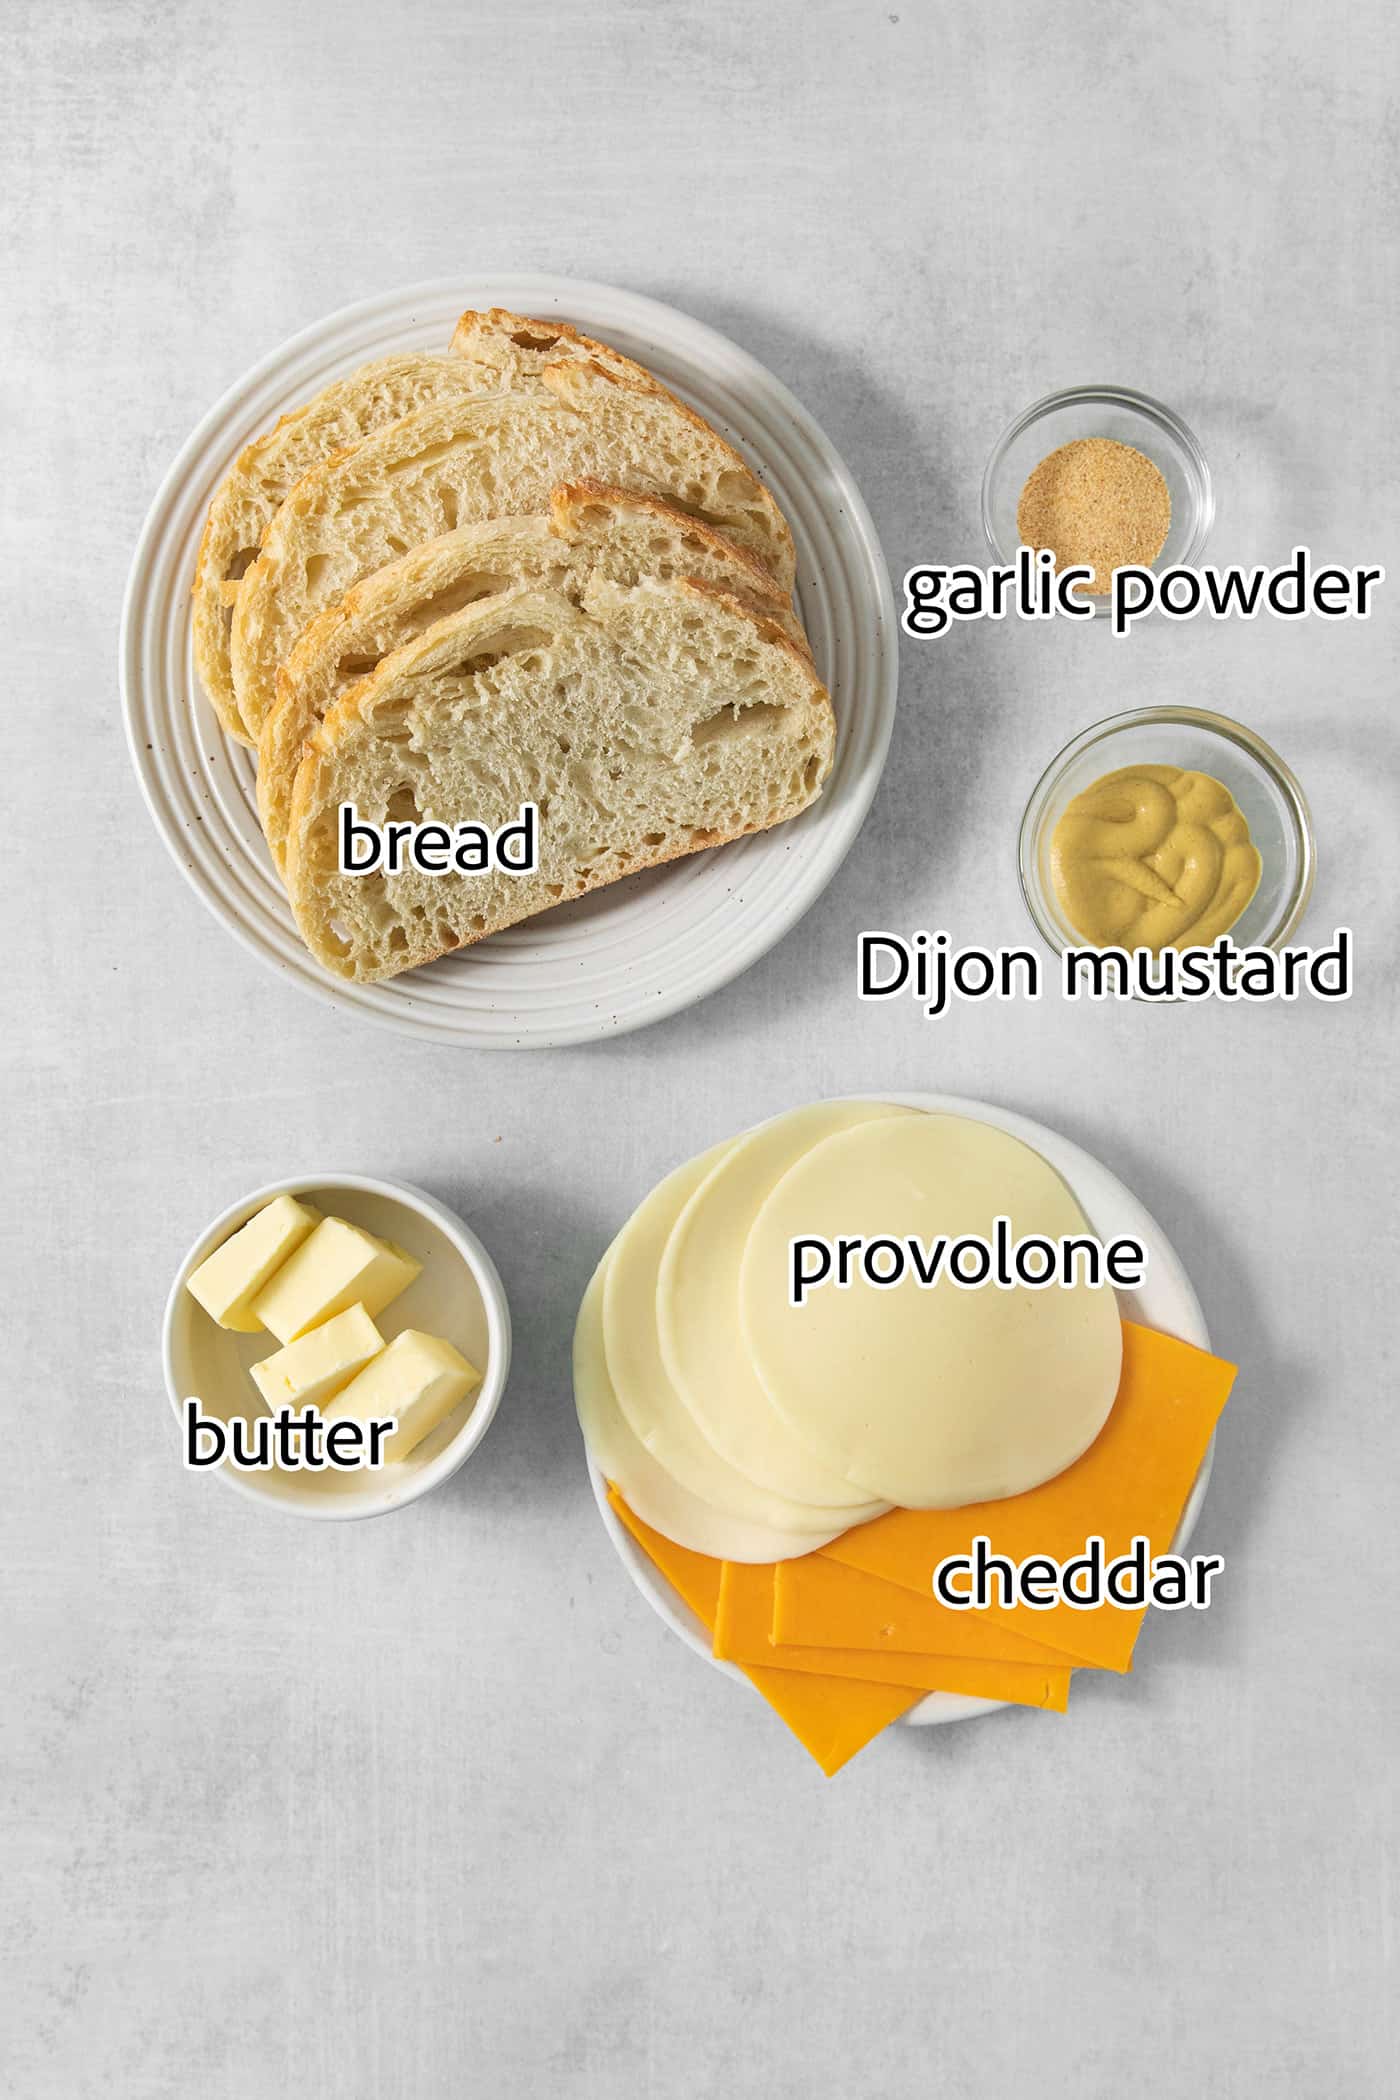 ingredients to make grilled cheese sandwiches in an air fryer